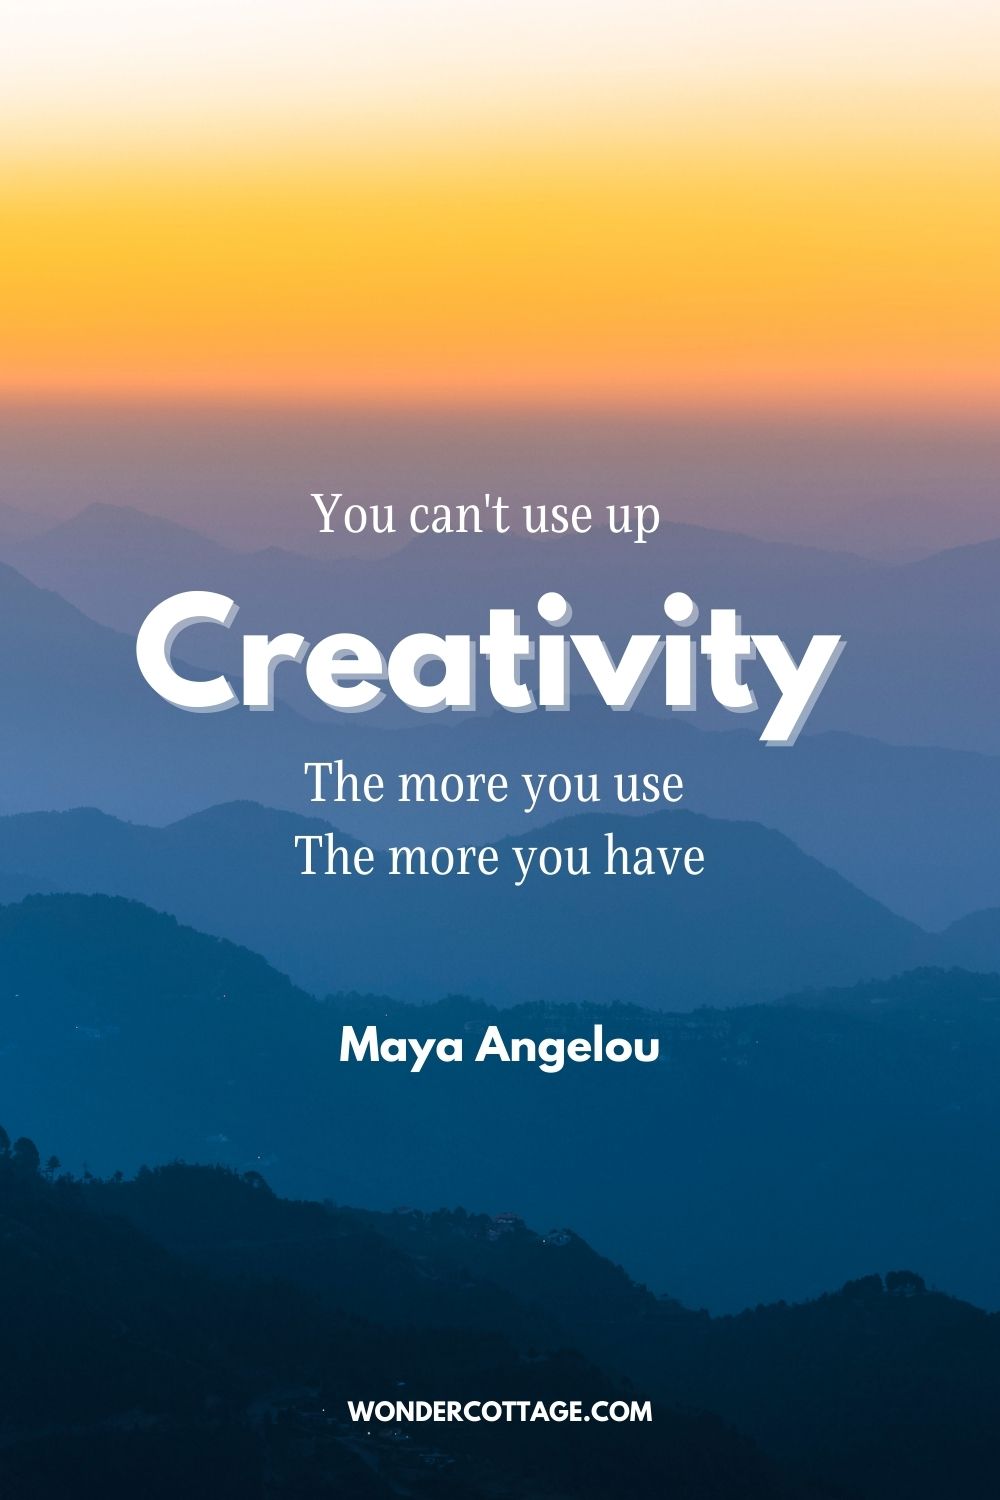 You can't use up creativity. The more you use, the more you have. Maya Angelou